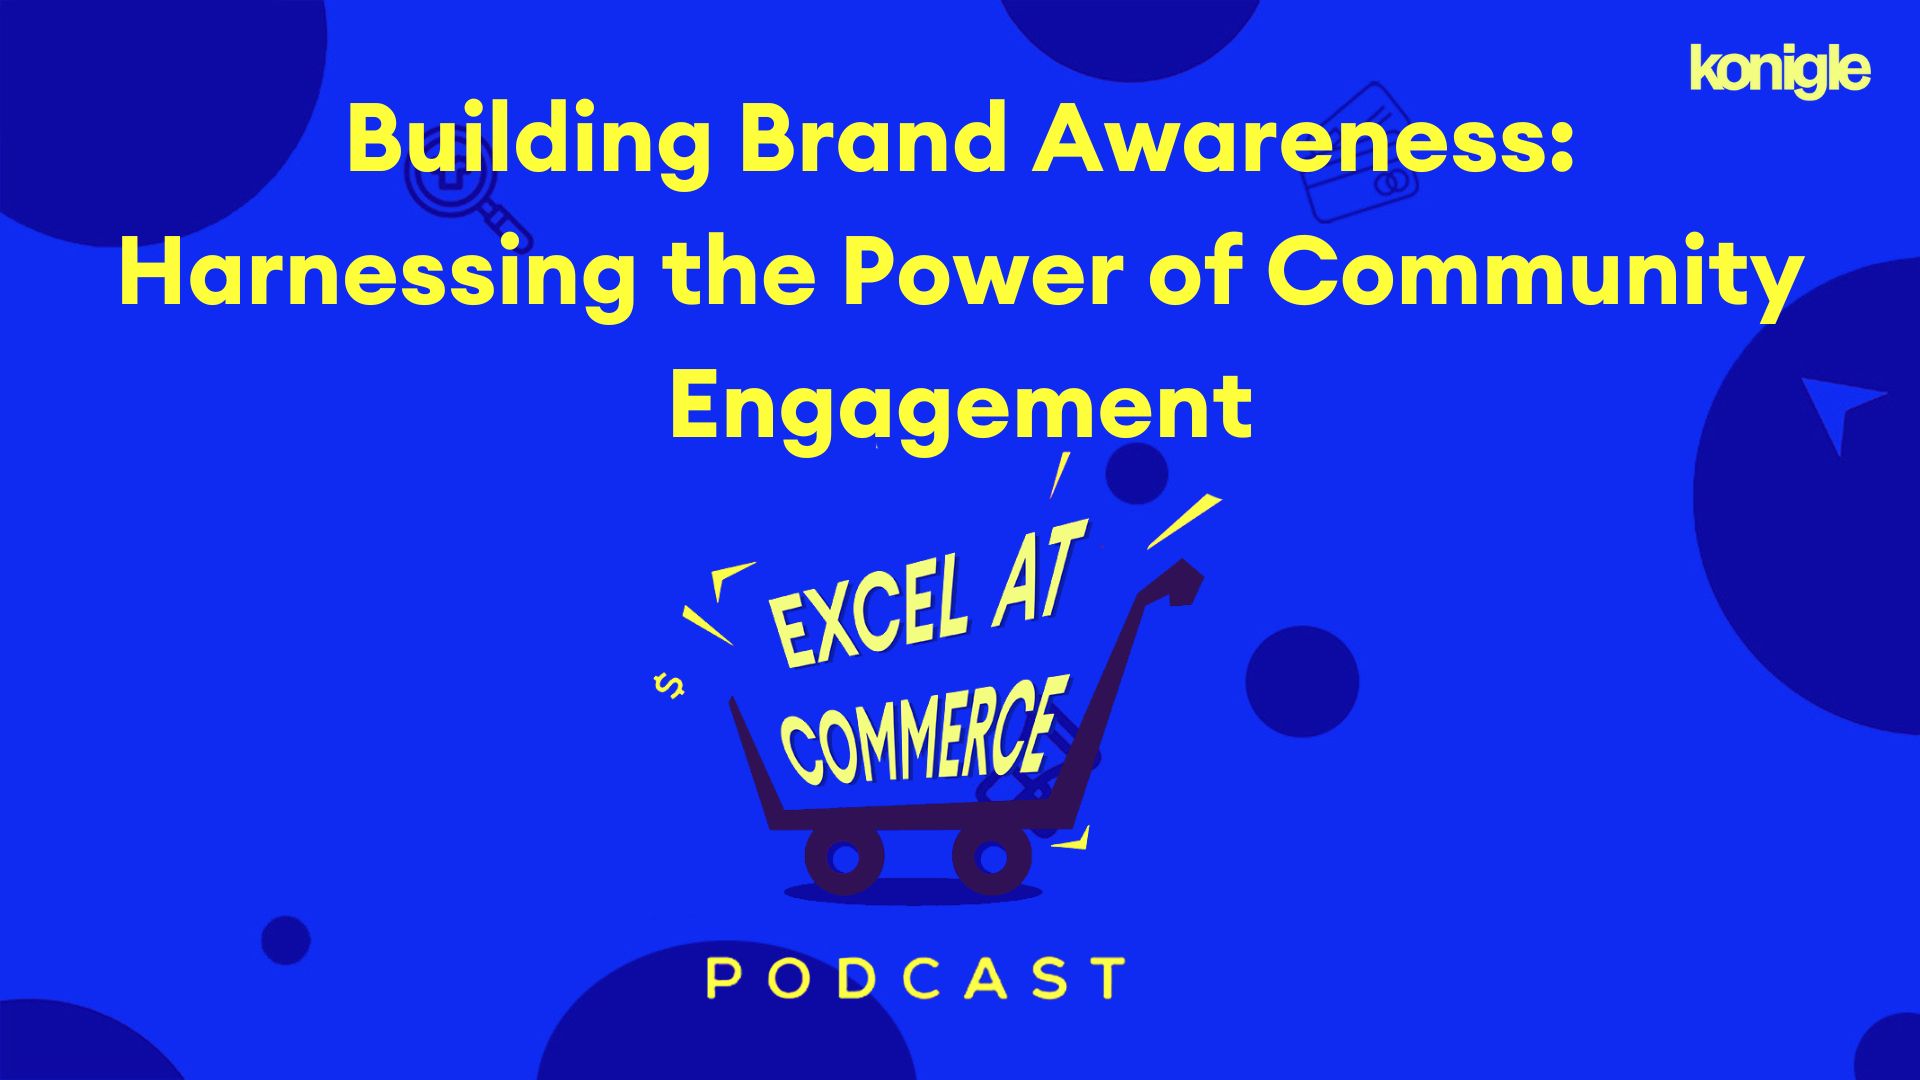 Building Brand Awareness: Harnessing the Power of Community Engagement